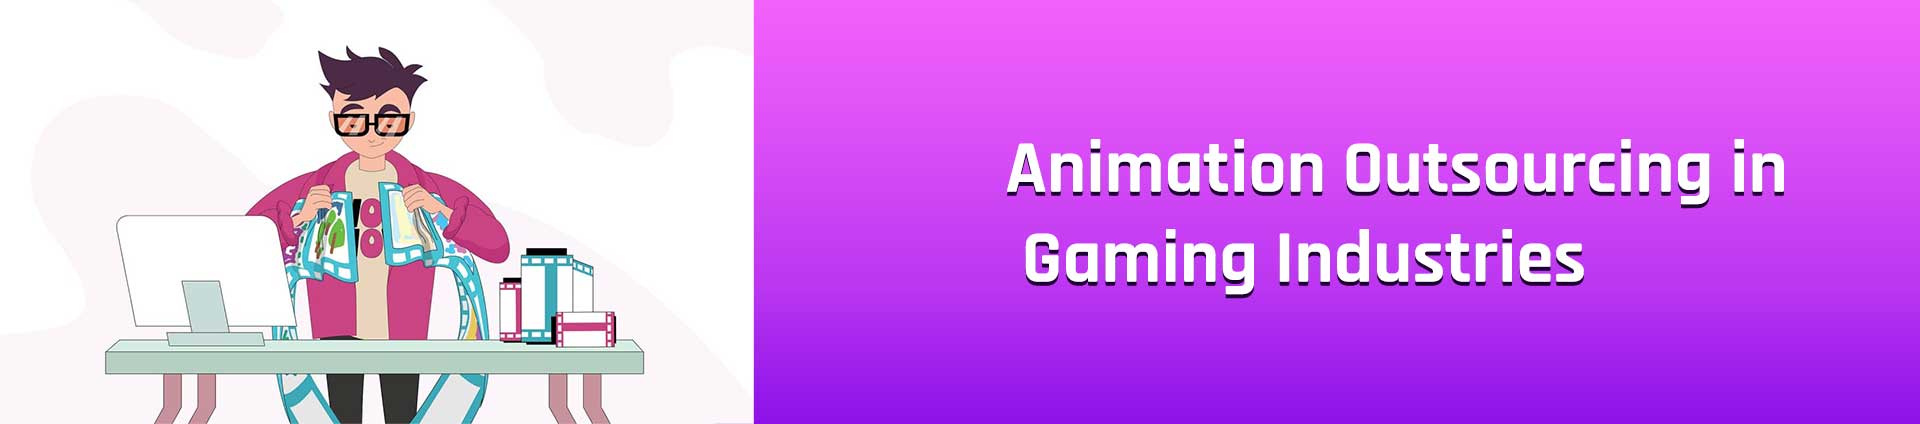 How the Gaming Industry Benefits from Animation Outsourcing Services?